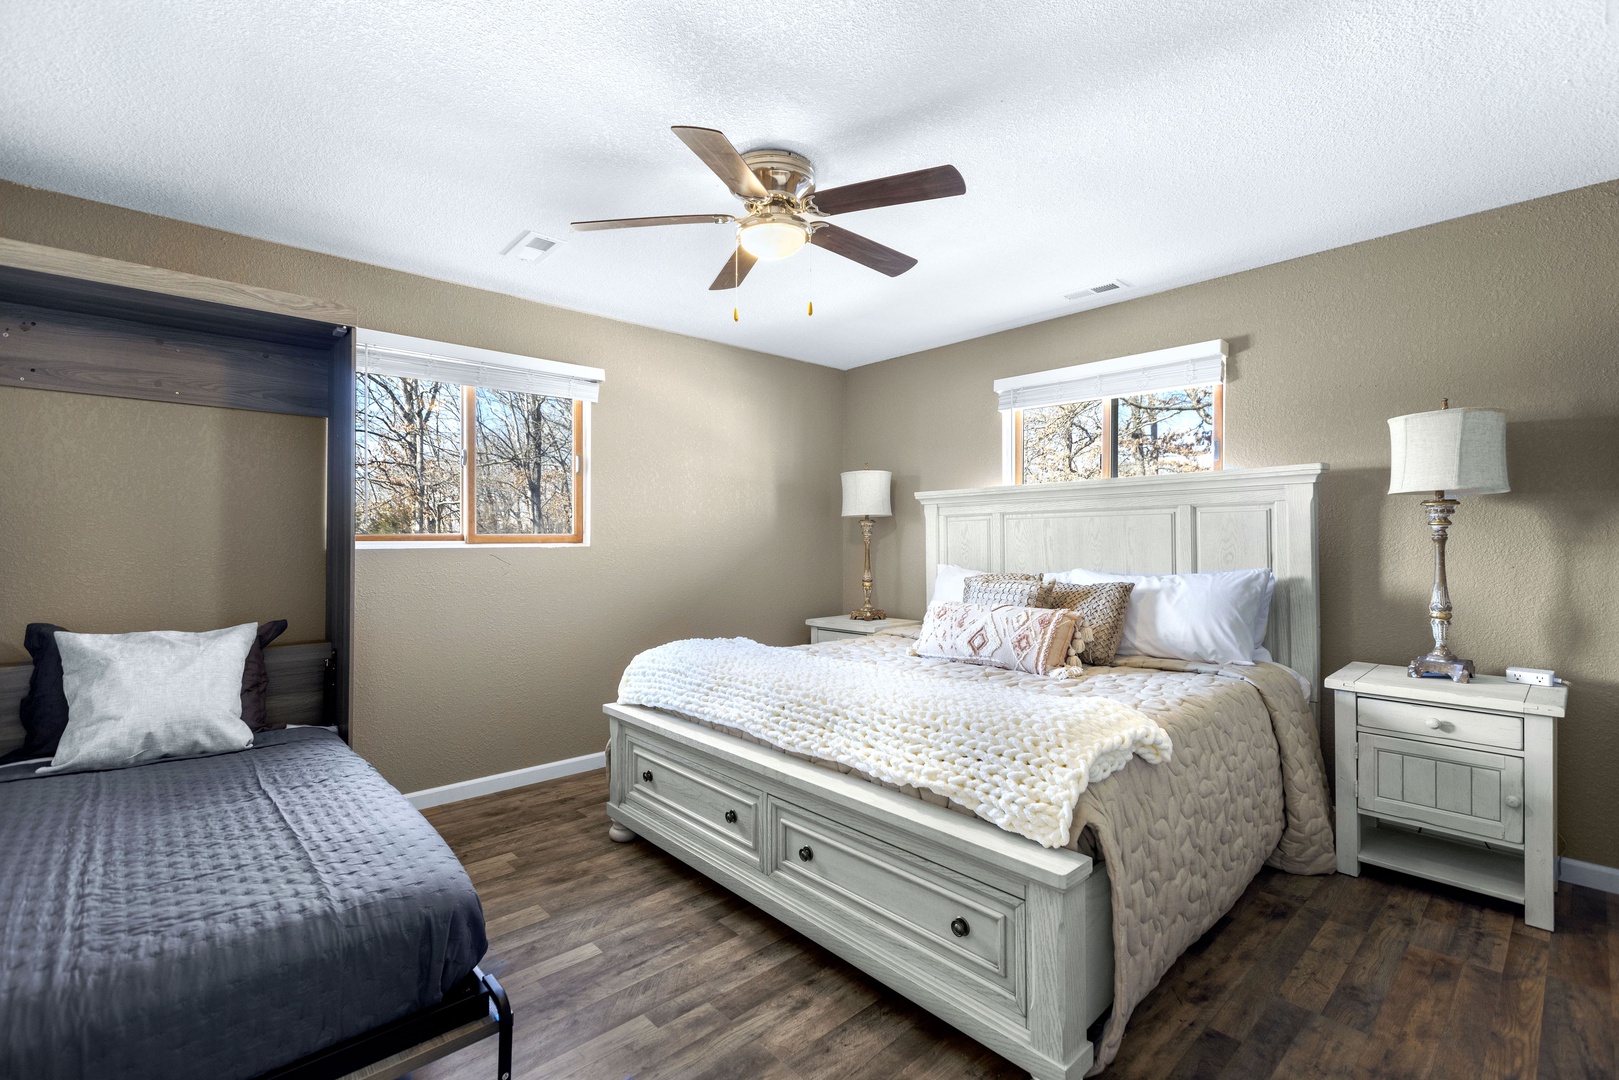 The 1st of 6 spacious bedrooms offers a king bed & twin murphy bed